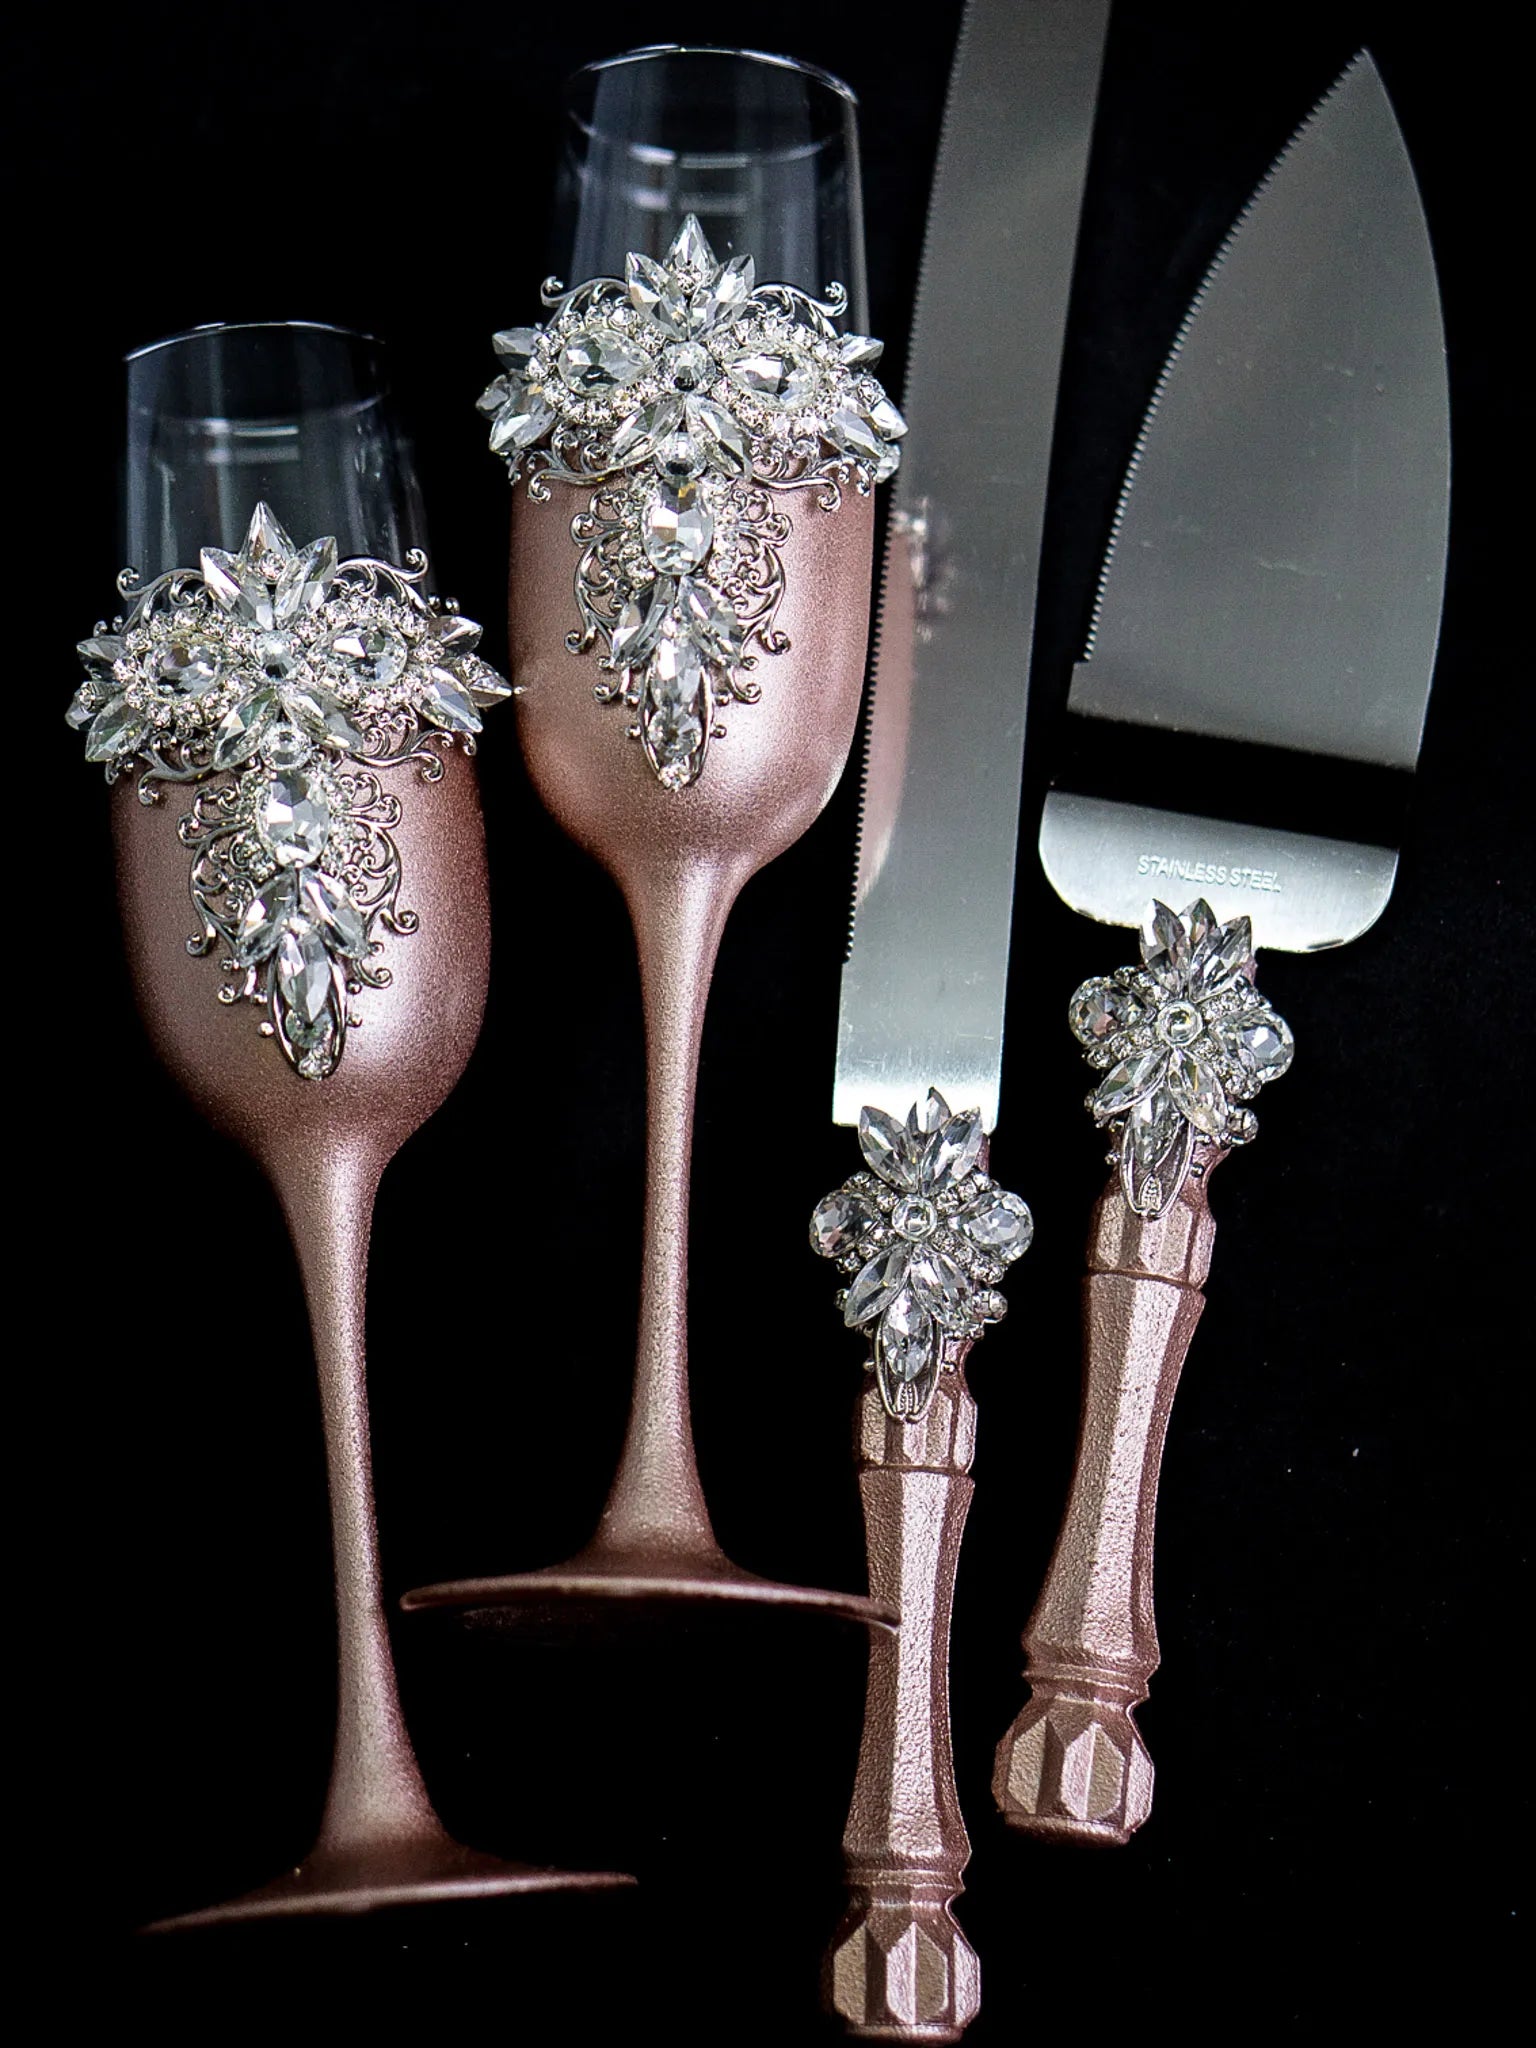 Luxurious Rose Gold Wedding Glassware and Cake Serving Set